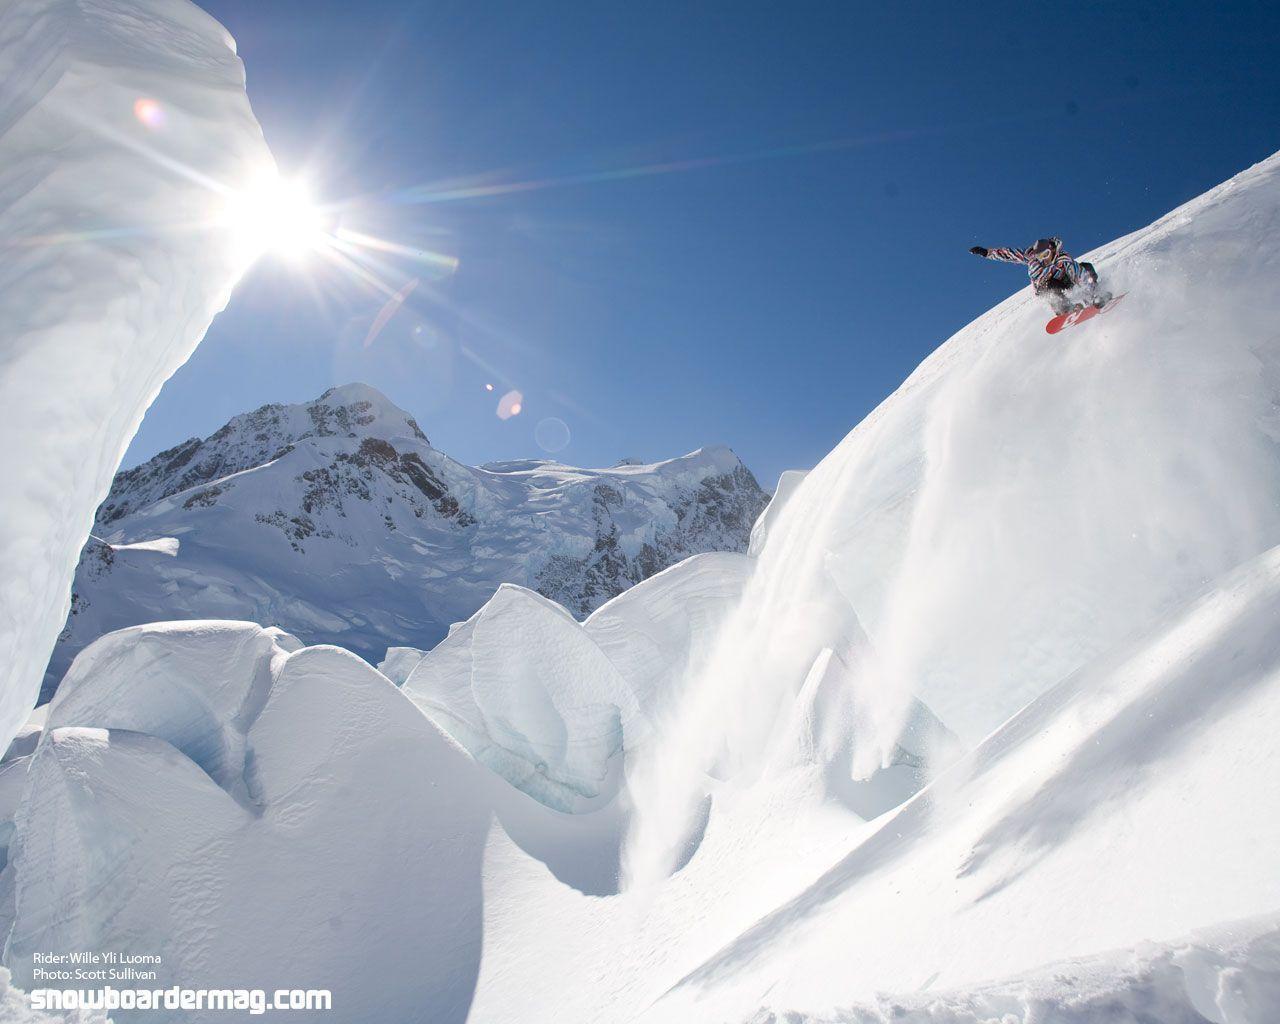 Wallpapers For > Hd Burton Snowboarding Wallpapers